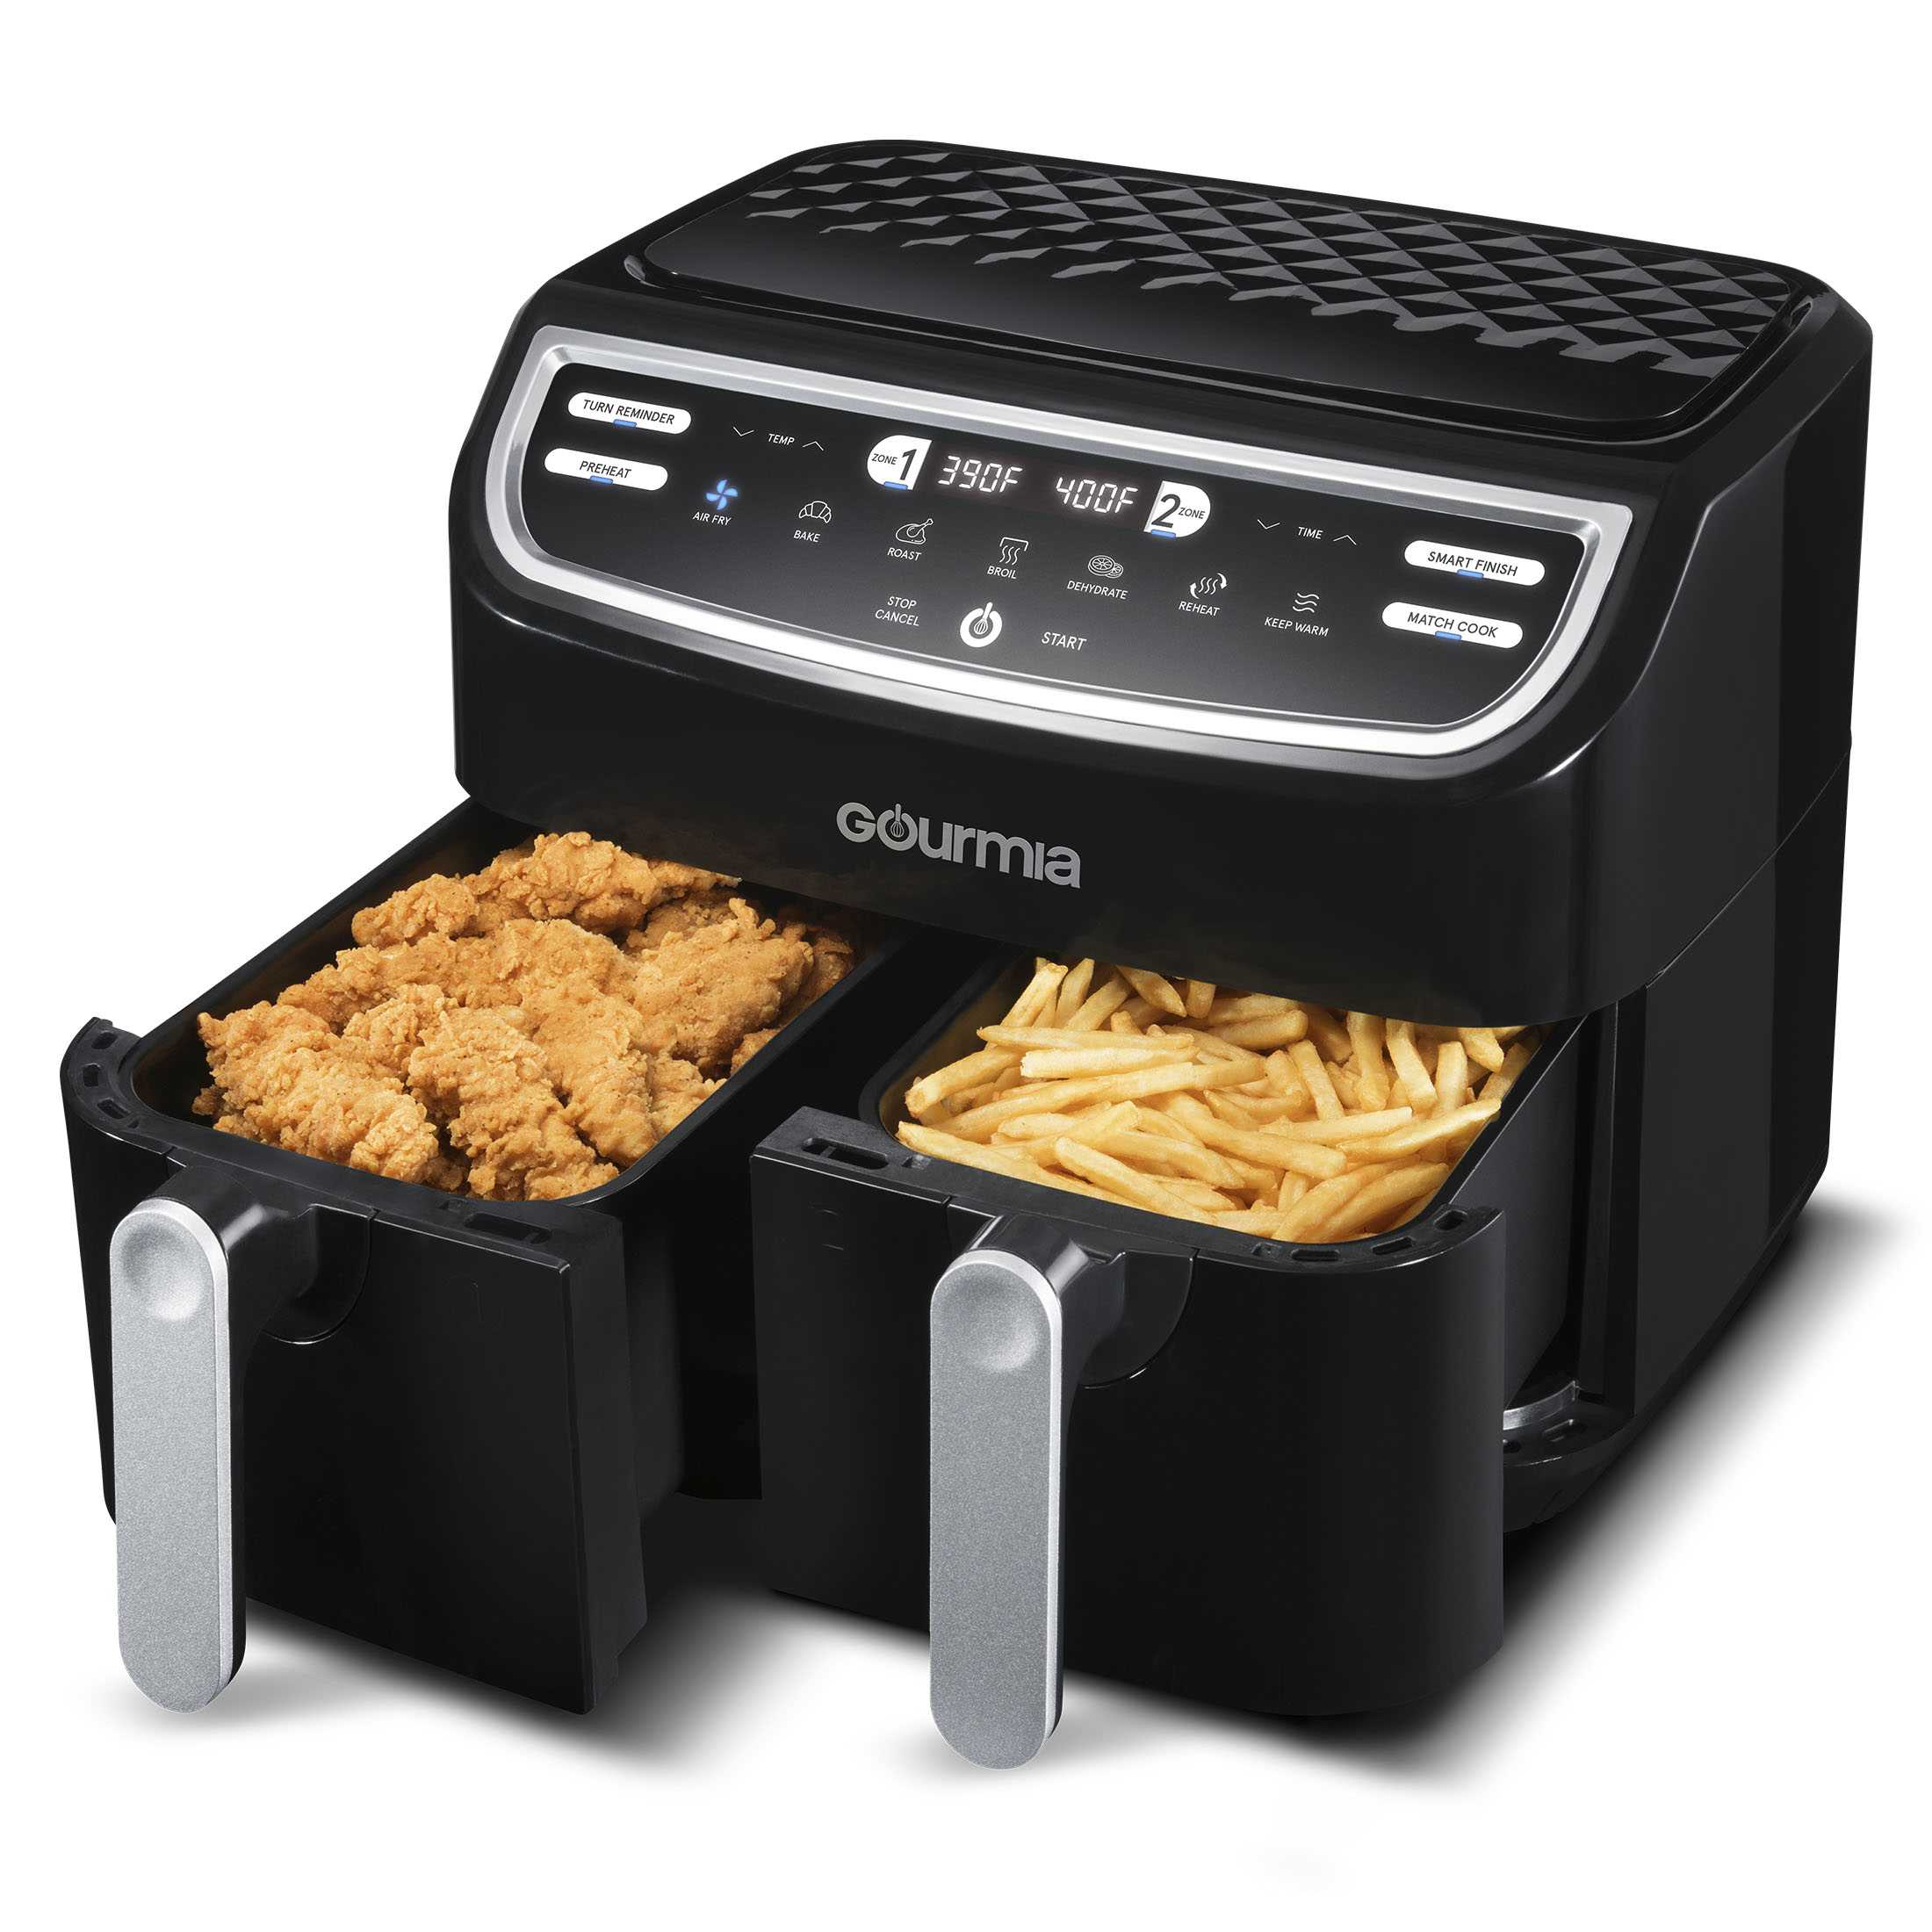 Gourmia 9 Qt 7-in-1 Dual Basket Digital Air Fryer with Smart Finish, BLK, 12.598 H, New - image 1 of 14